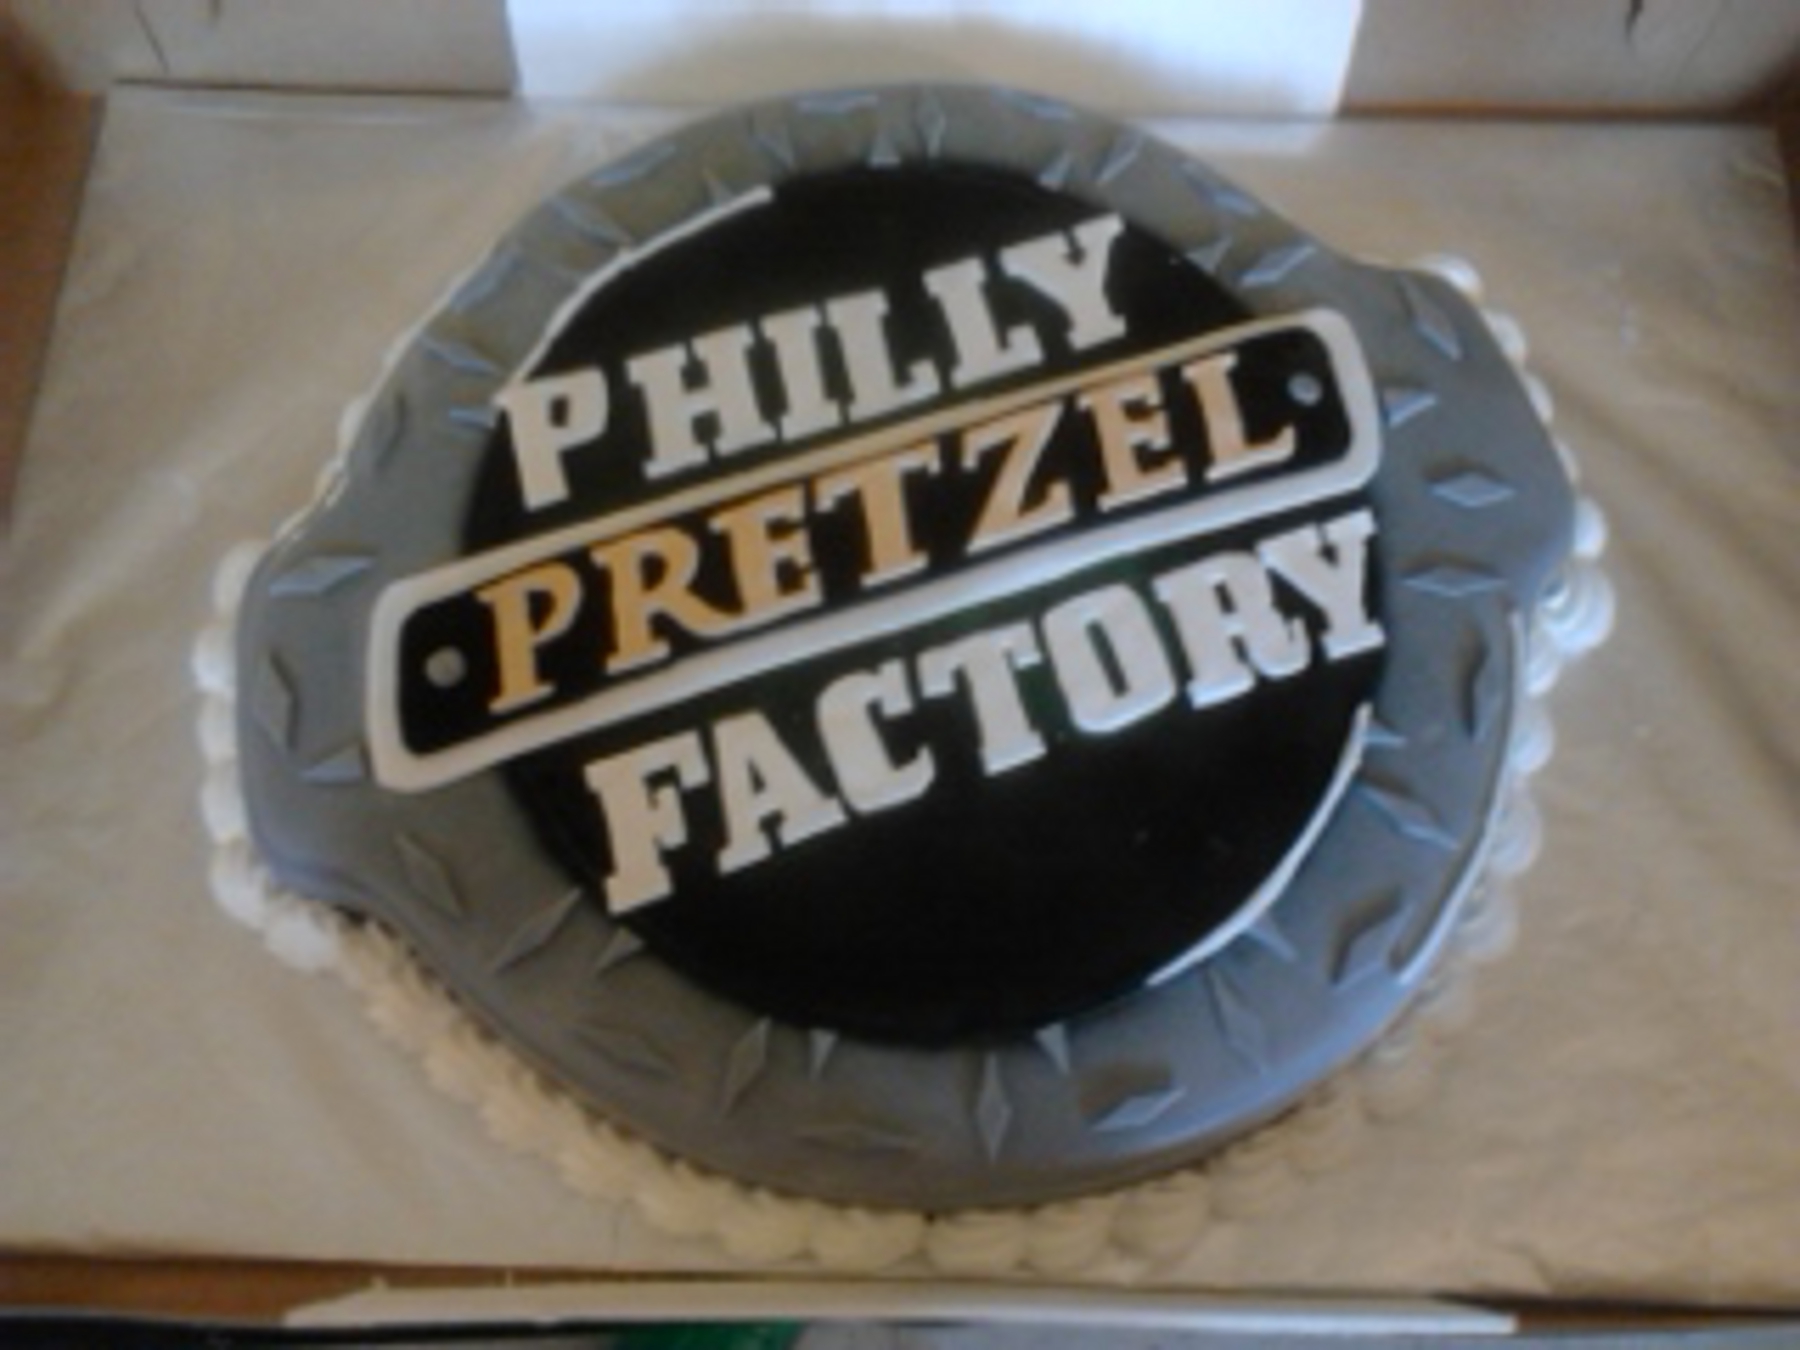 Philly Pretzel Factory Delivery